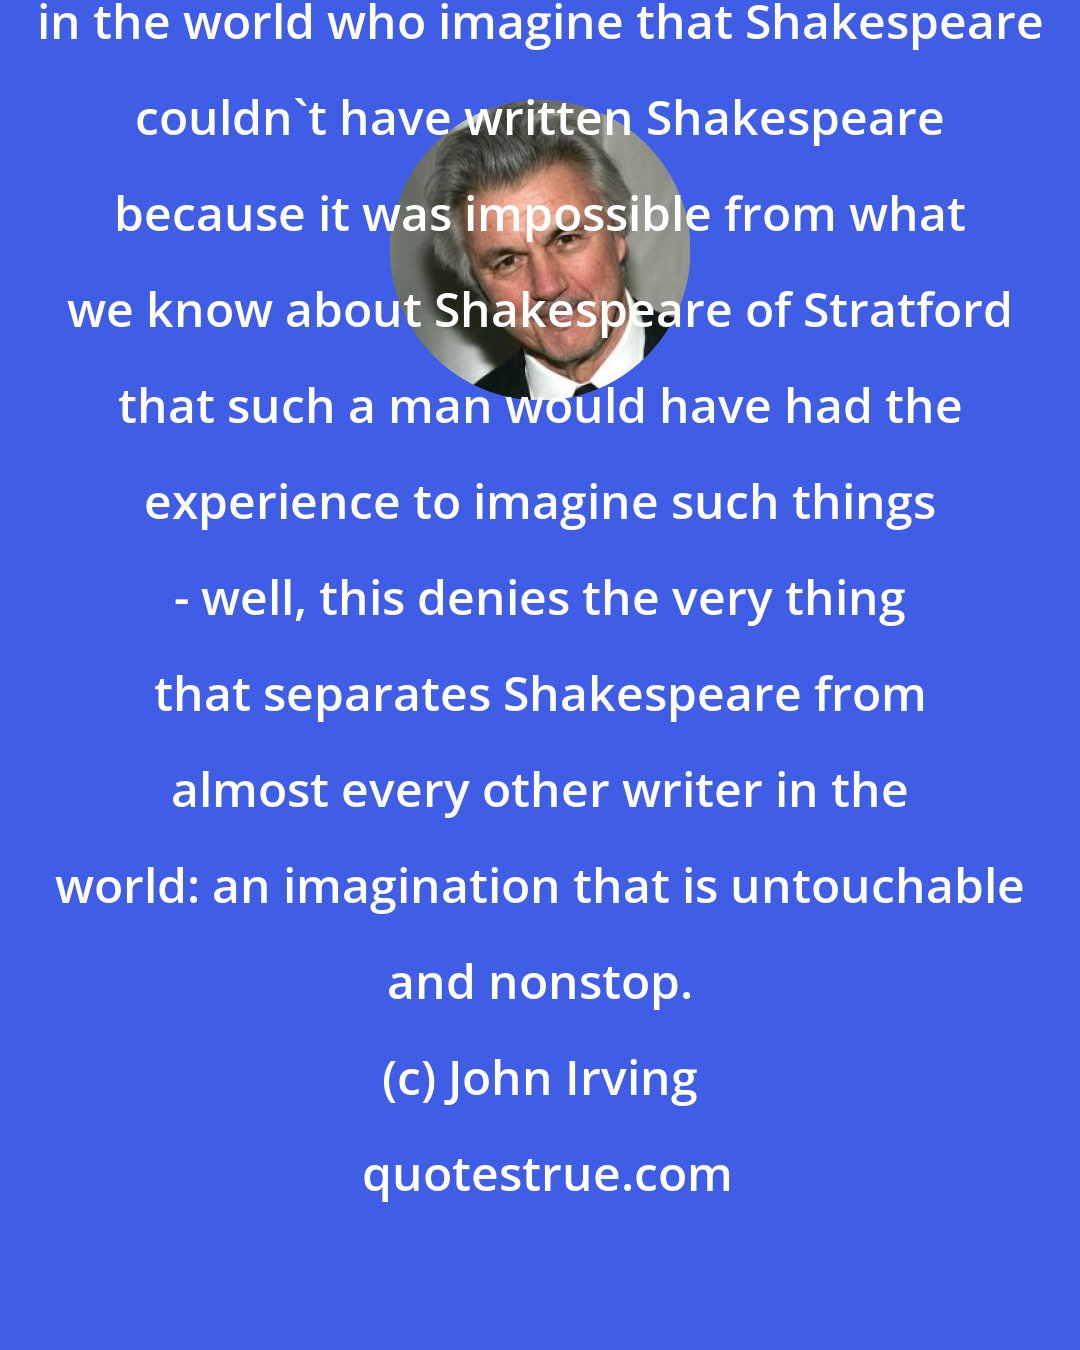 John Irving: All the unimaginative assholes in the world who imagine that Shakespeare couldn't have written Shakespeare because it was impossible from what we know about Shakespeare of Stratford that such a man would have had the experience to imagine such things - well, this denies the very thing that separates Shakespeare from almost every other writer in the world: an imagination that is untouchable and nonstop.